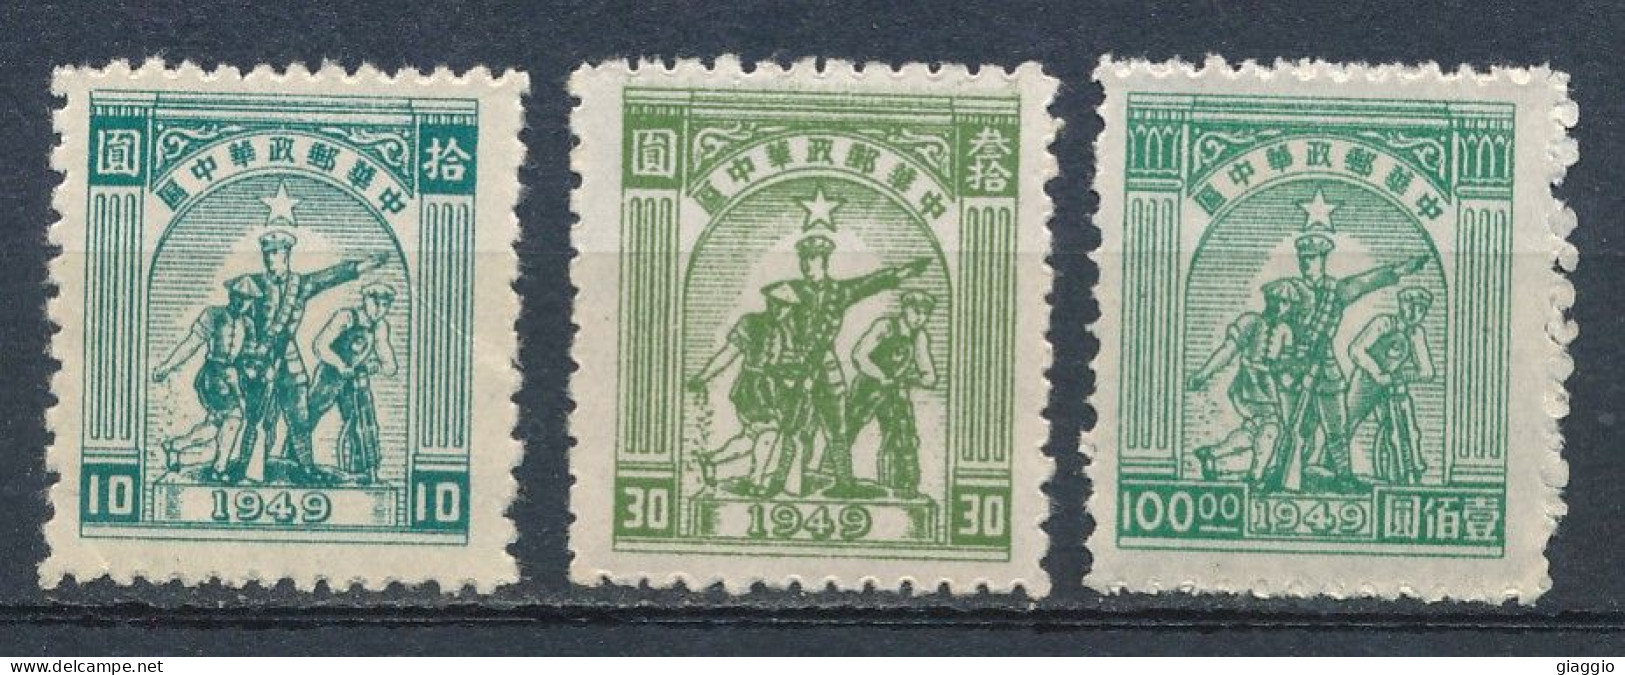 °°° LOT CINA CHINA CENTRALE - Y&T N°65/67/74 - 1949 °°° - China Central 1948-49